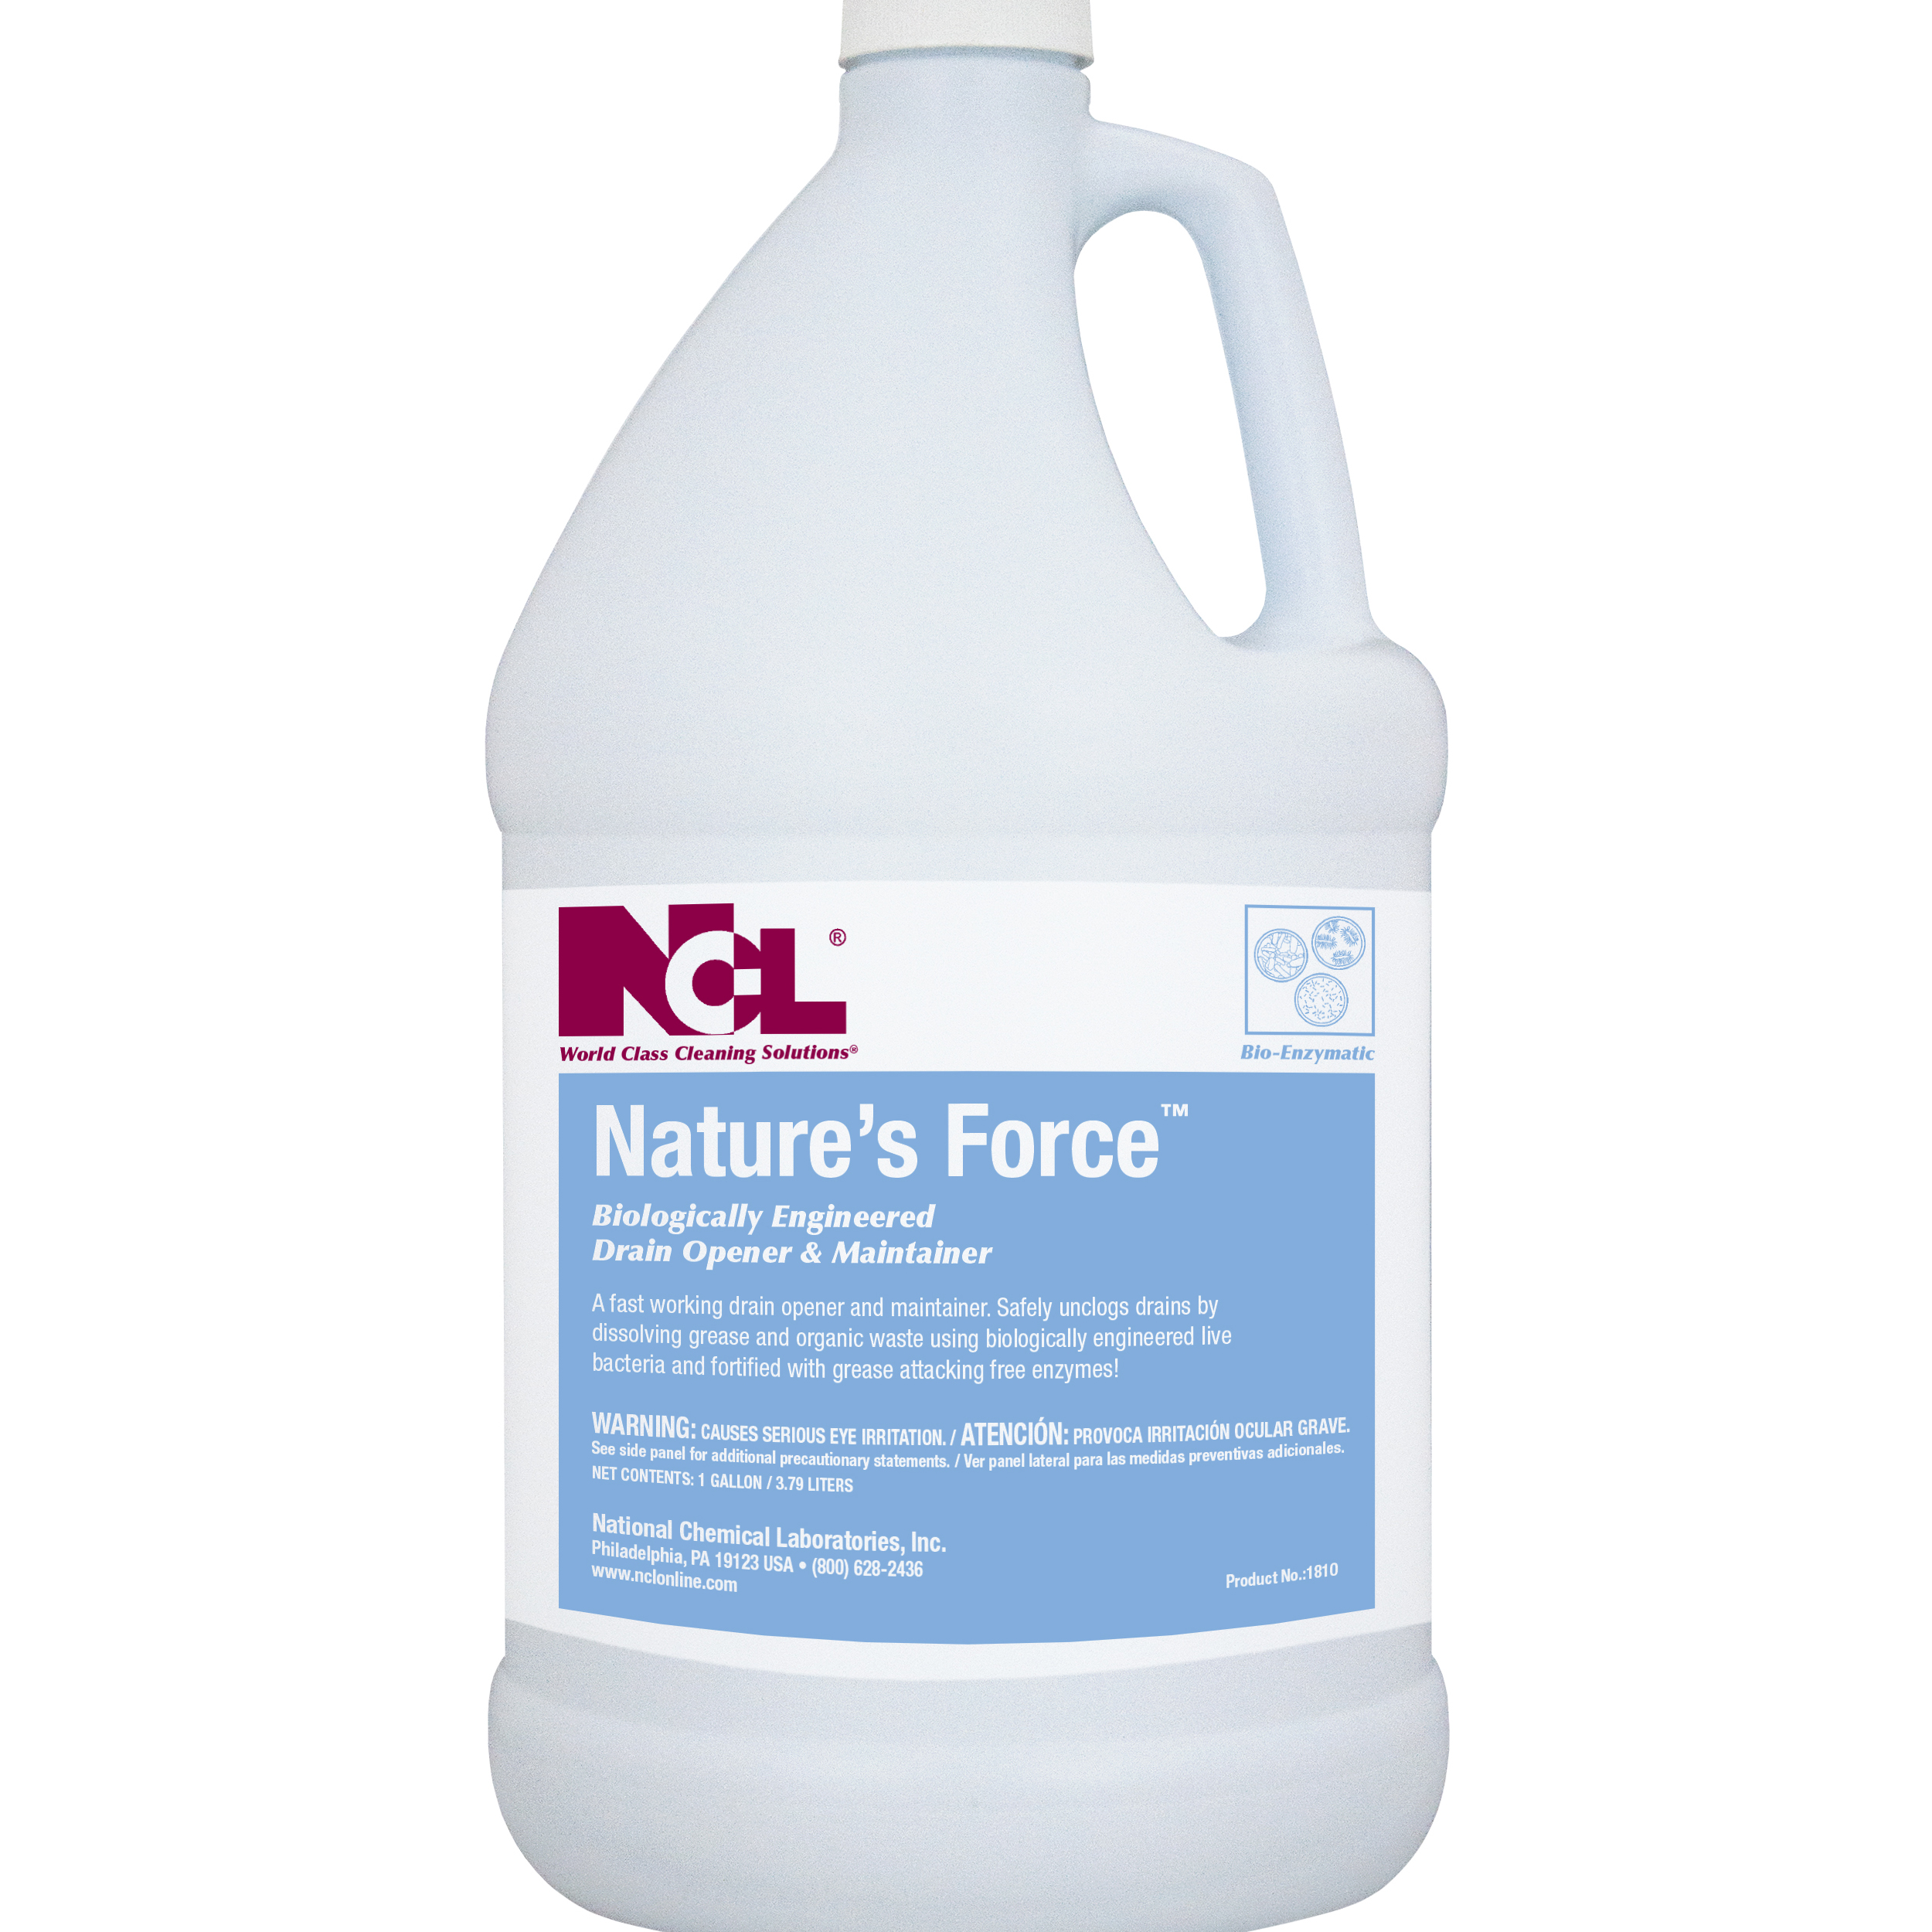  NATURE'S FORCE Bio-Enzymatic Drain Opener and Maintainer 4/1 Gal. Case (NCL1810-29) 